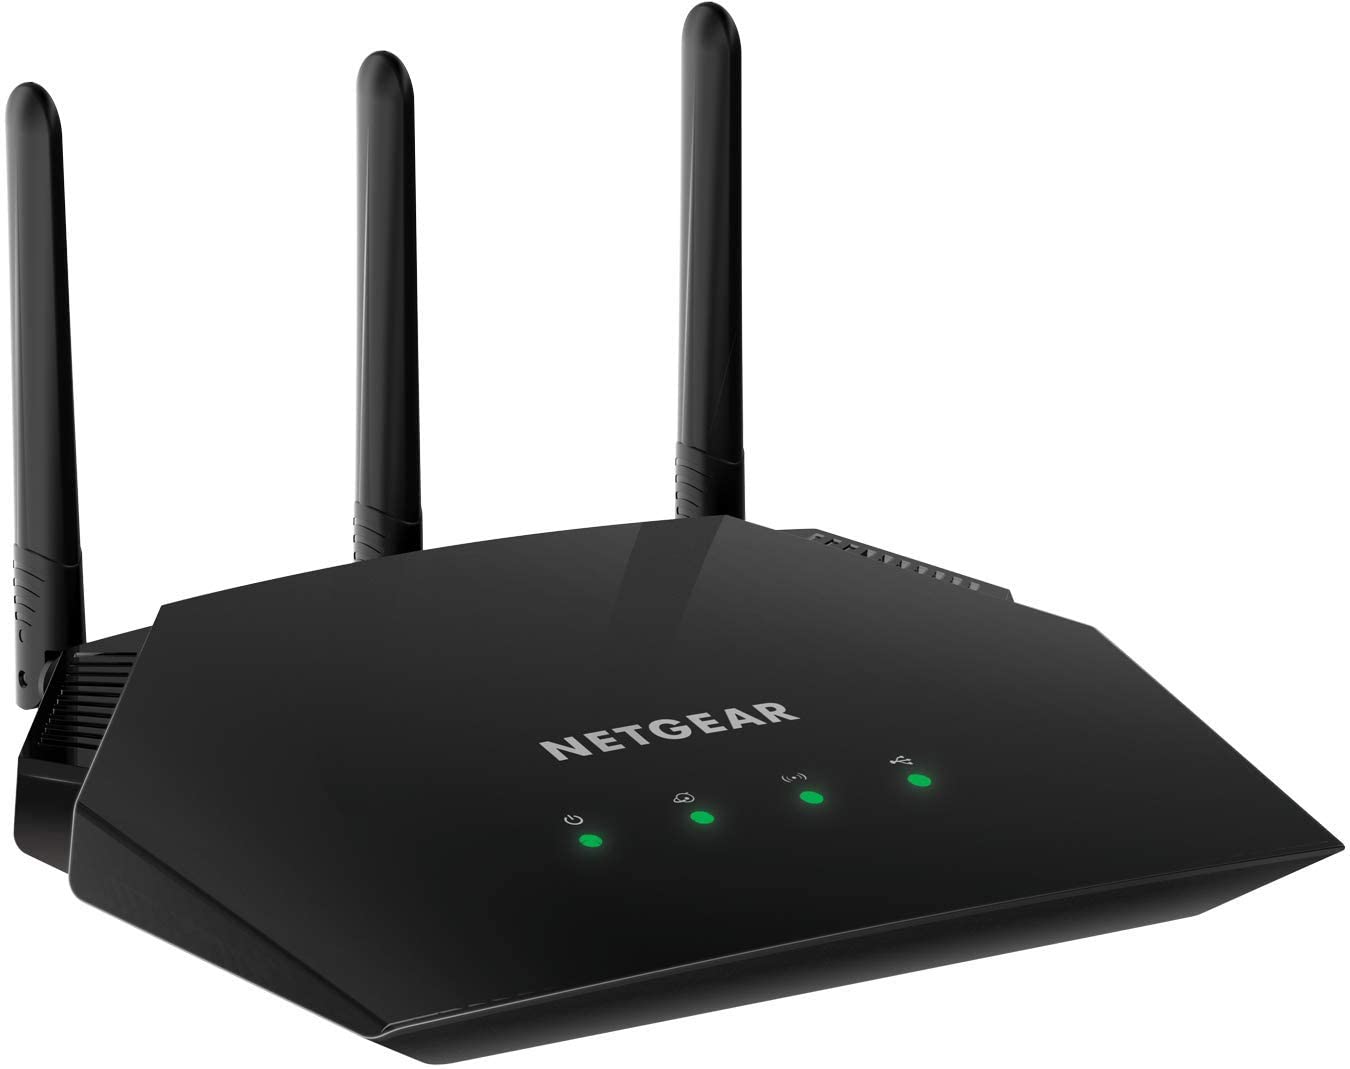 Netgear WLAN Access Point AC2000 Dual Band 802.11ac 4x4 with up to 1200 MBbit/s, MU-MIMO, Plug and Play, 4x LAN & 1x USB Port